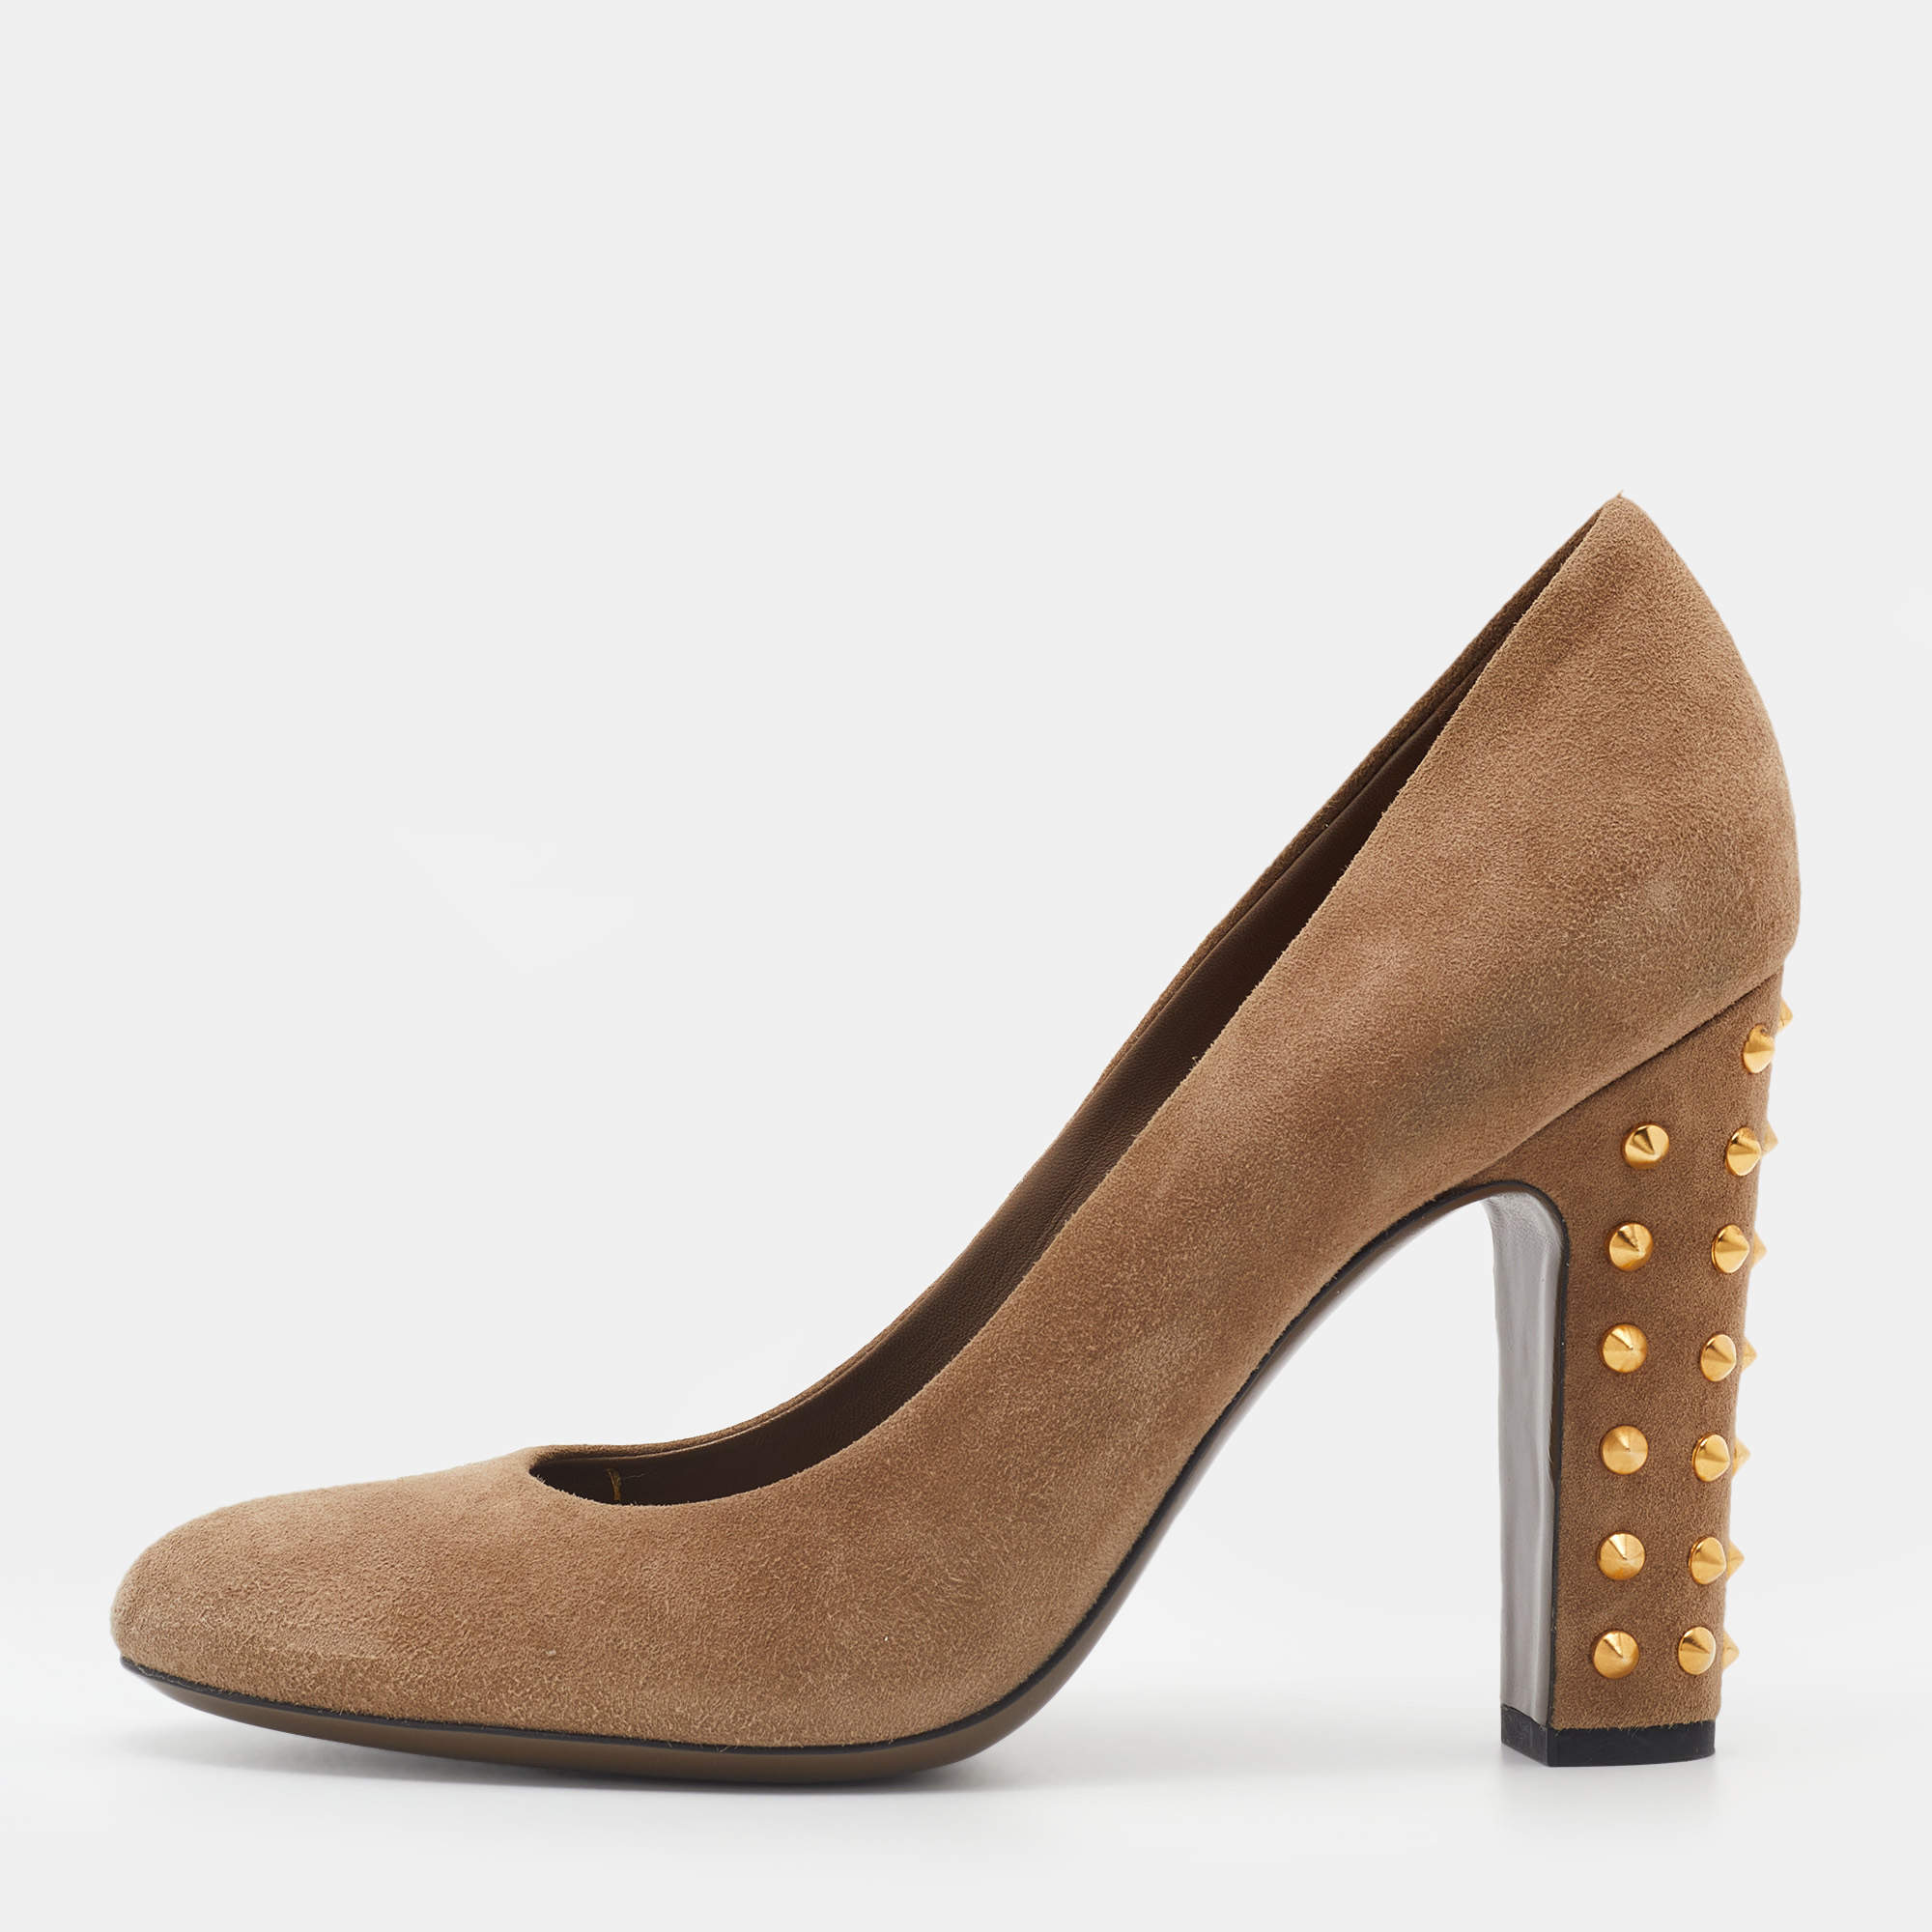 Leather pumps with a comfortable light brown stiletto heel - BRAVOMODA